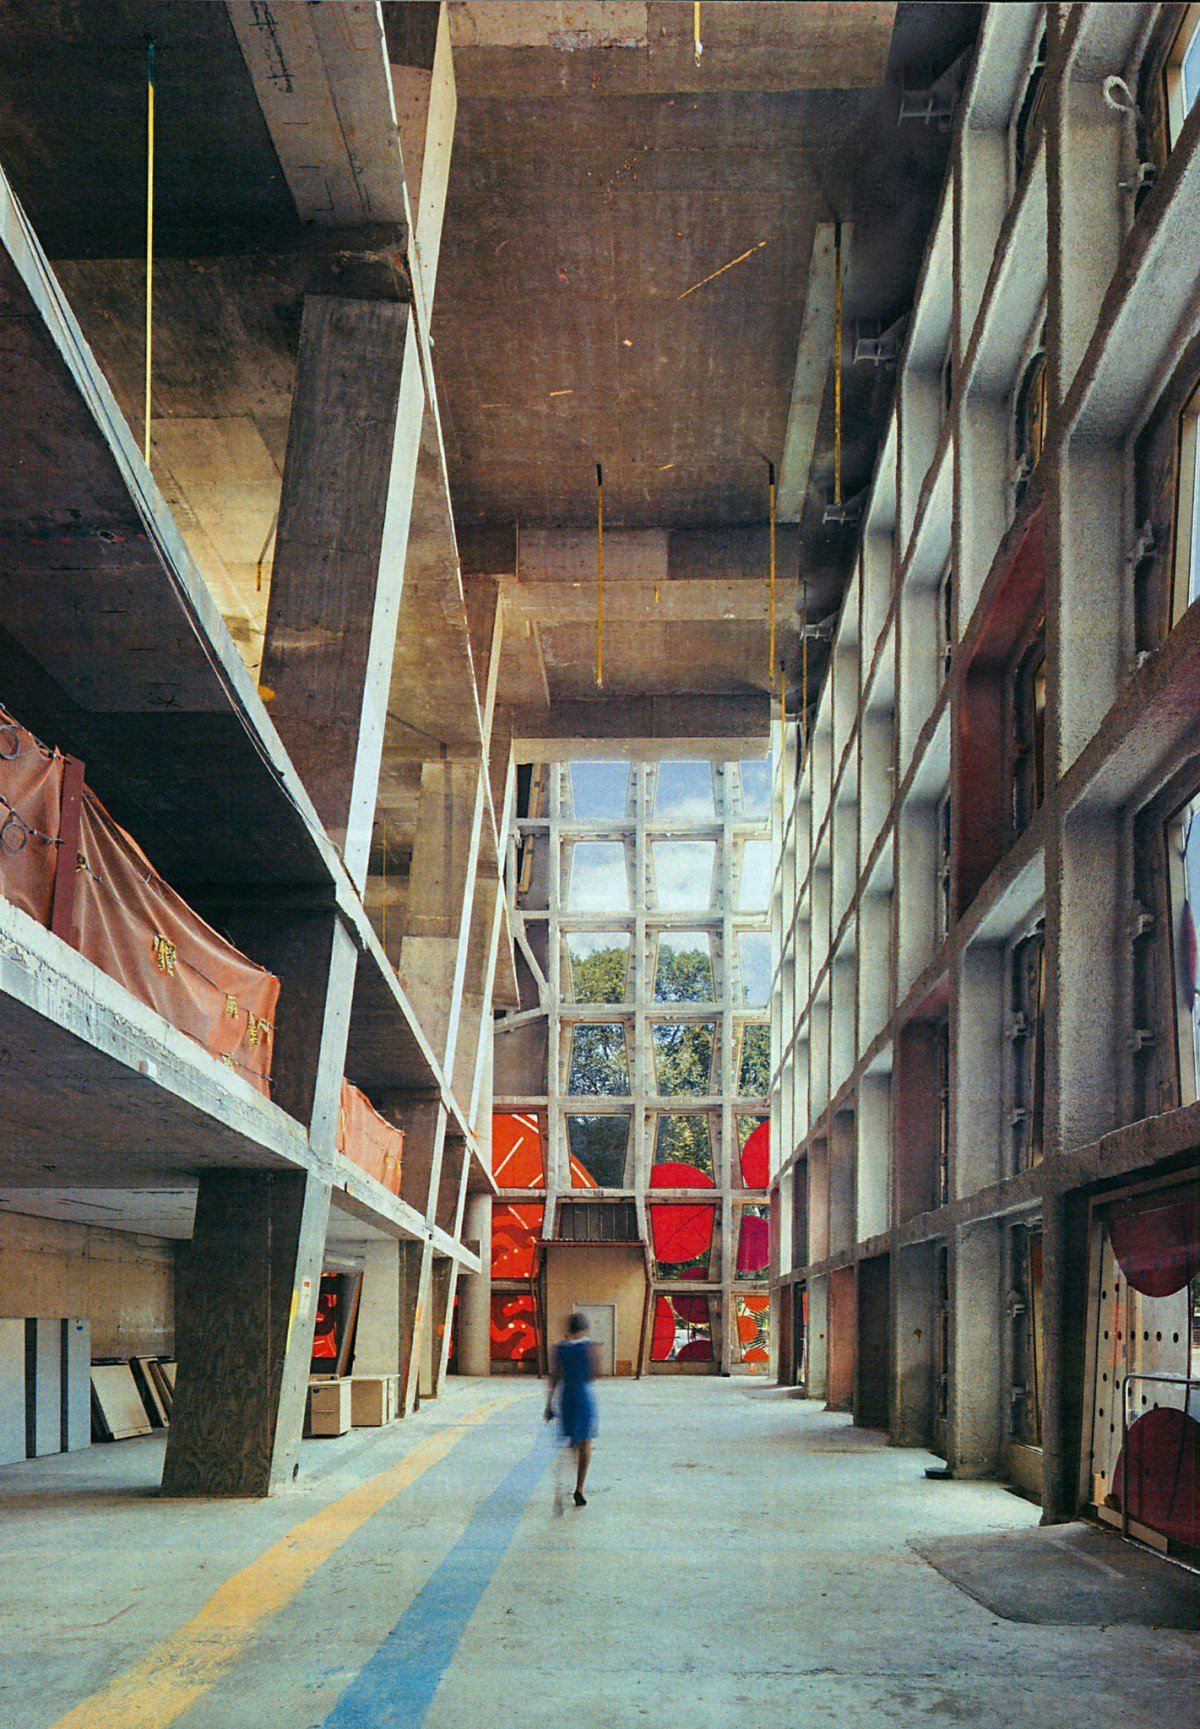 The lobby of the Africa Center in its current, unfinished state. Photo: the Africa Center.